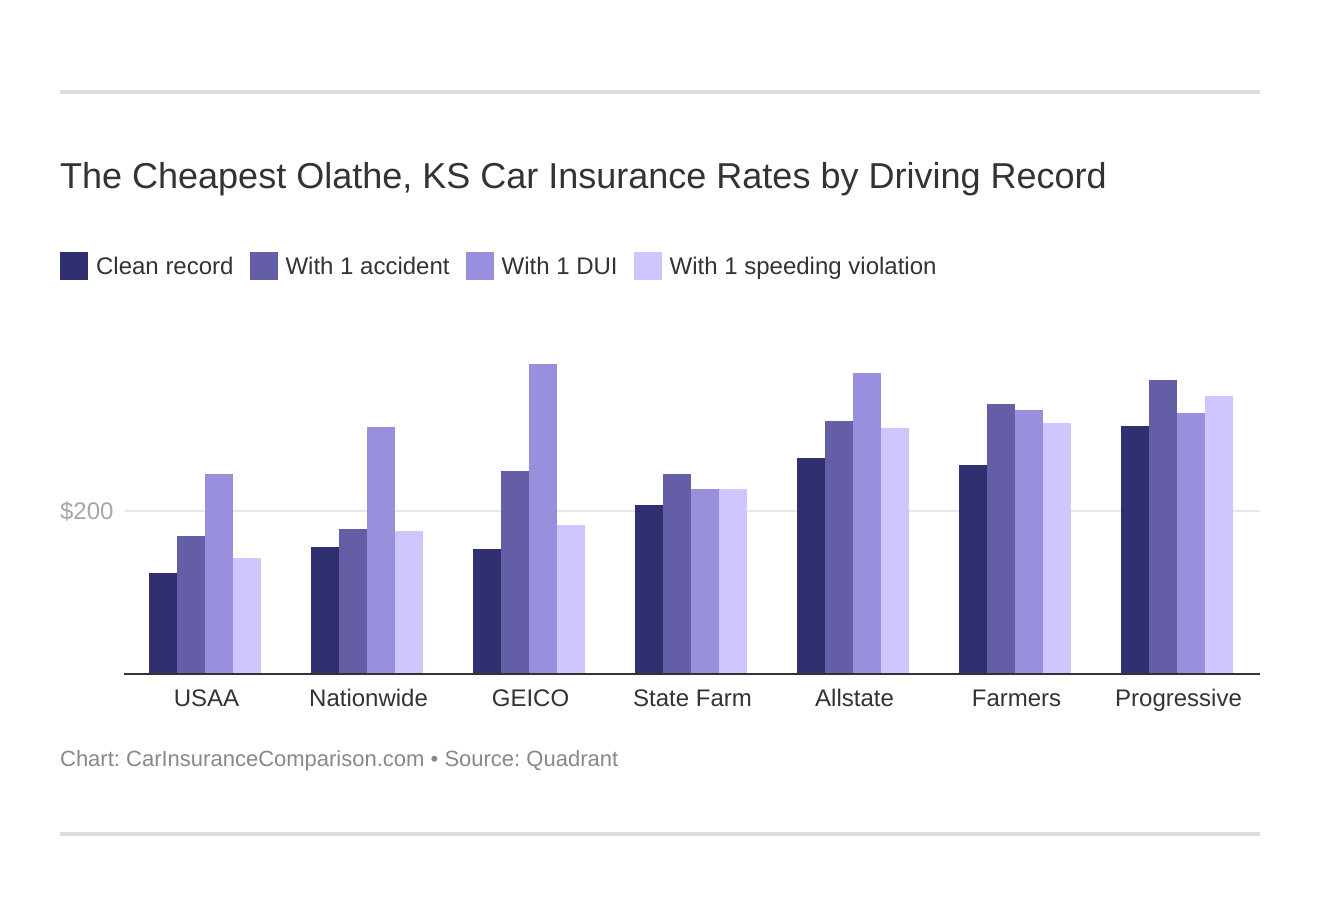 The Cheapest Olathe, KS Car Insurance Rates by Driving Record